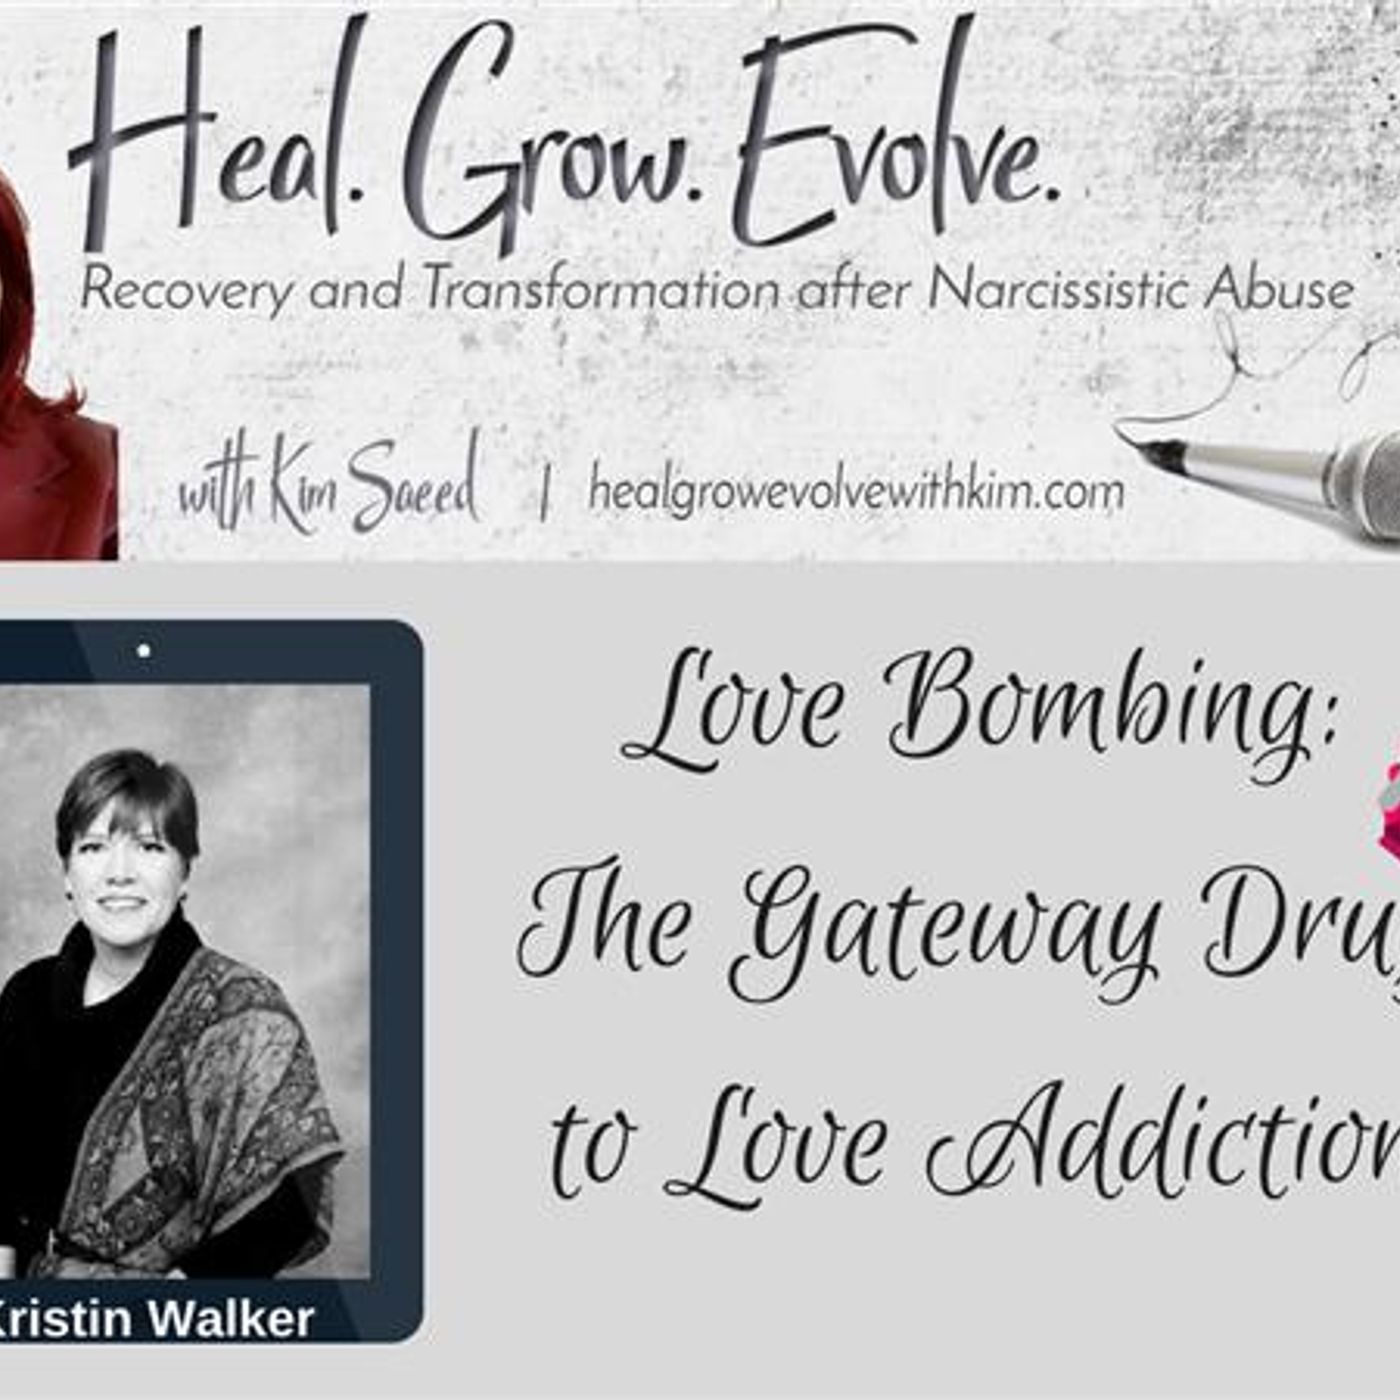 Love Bombing: The Gateway Drug to Love Addiction - with Kristin Walker